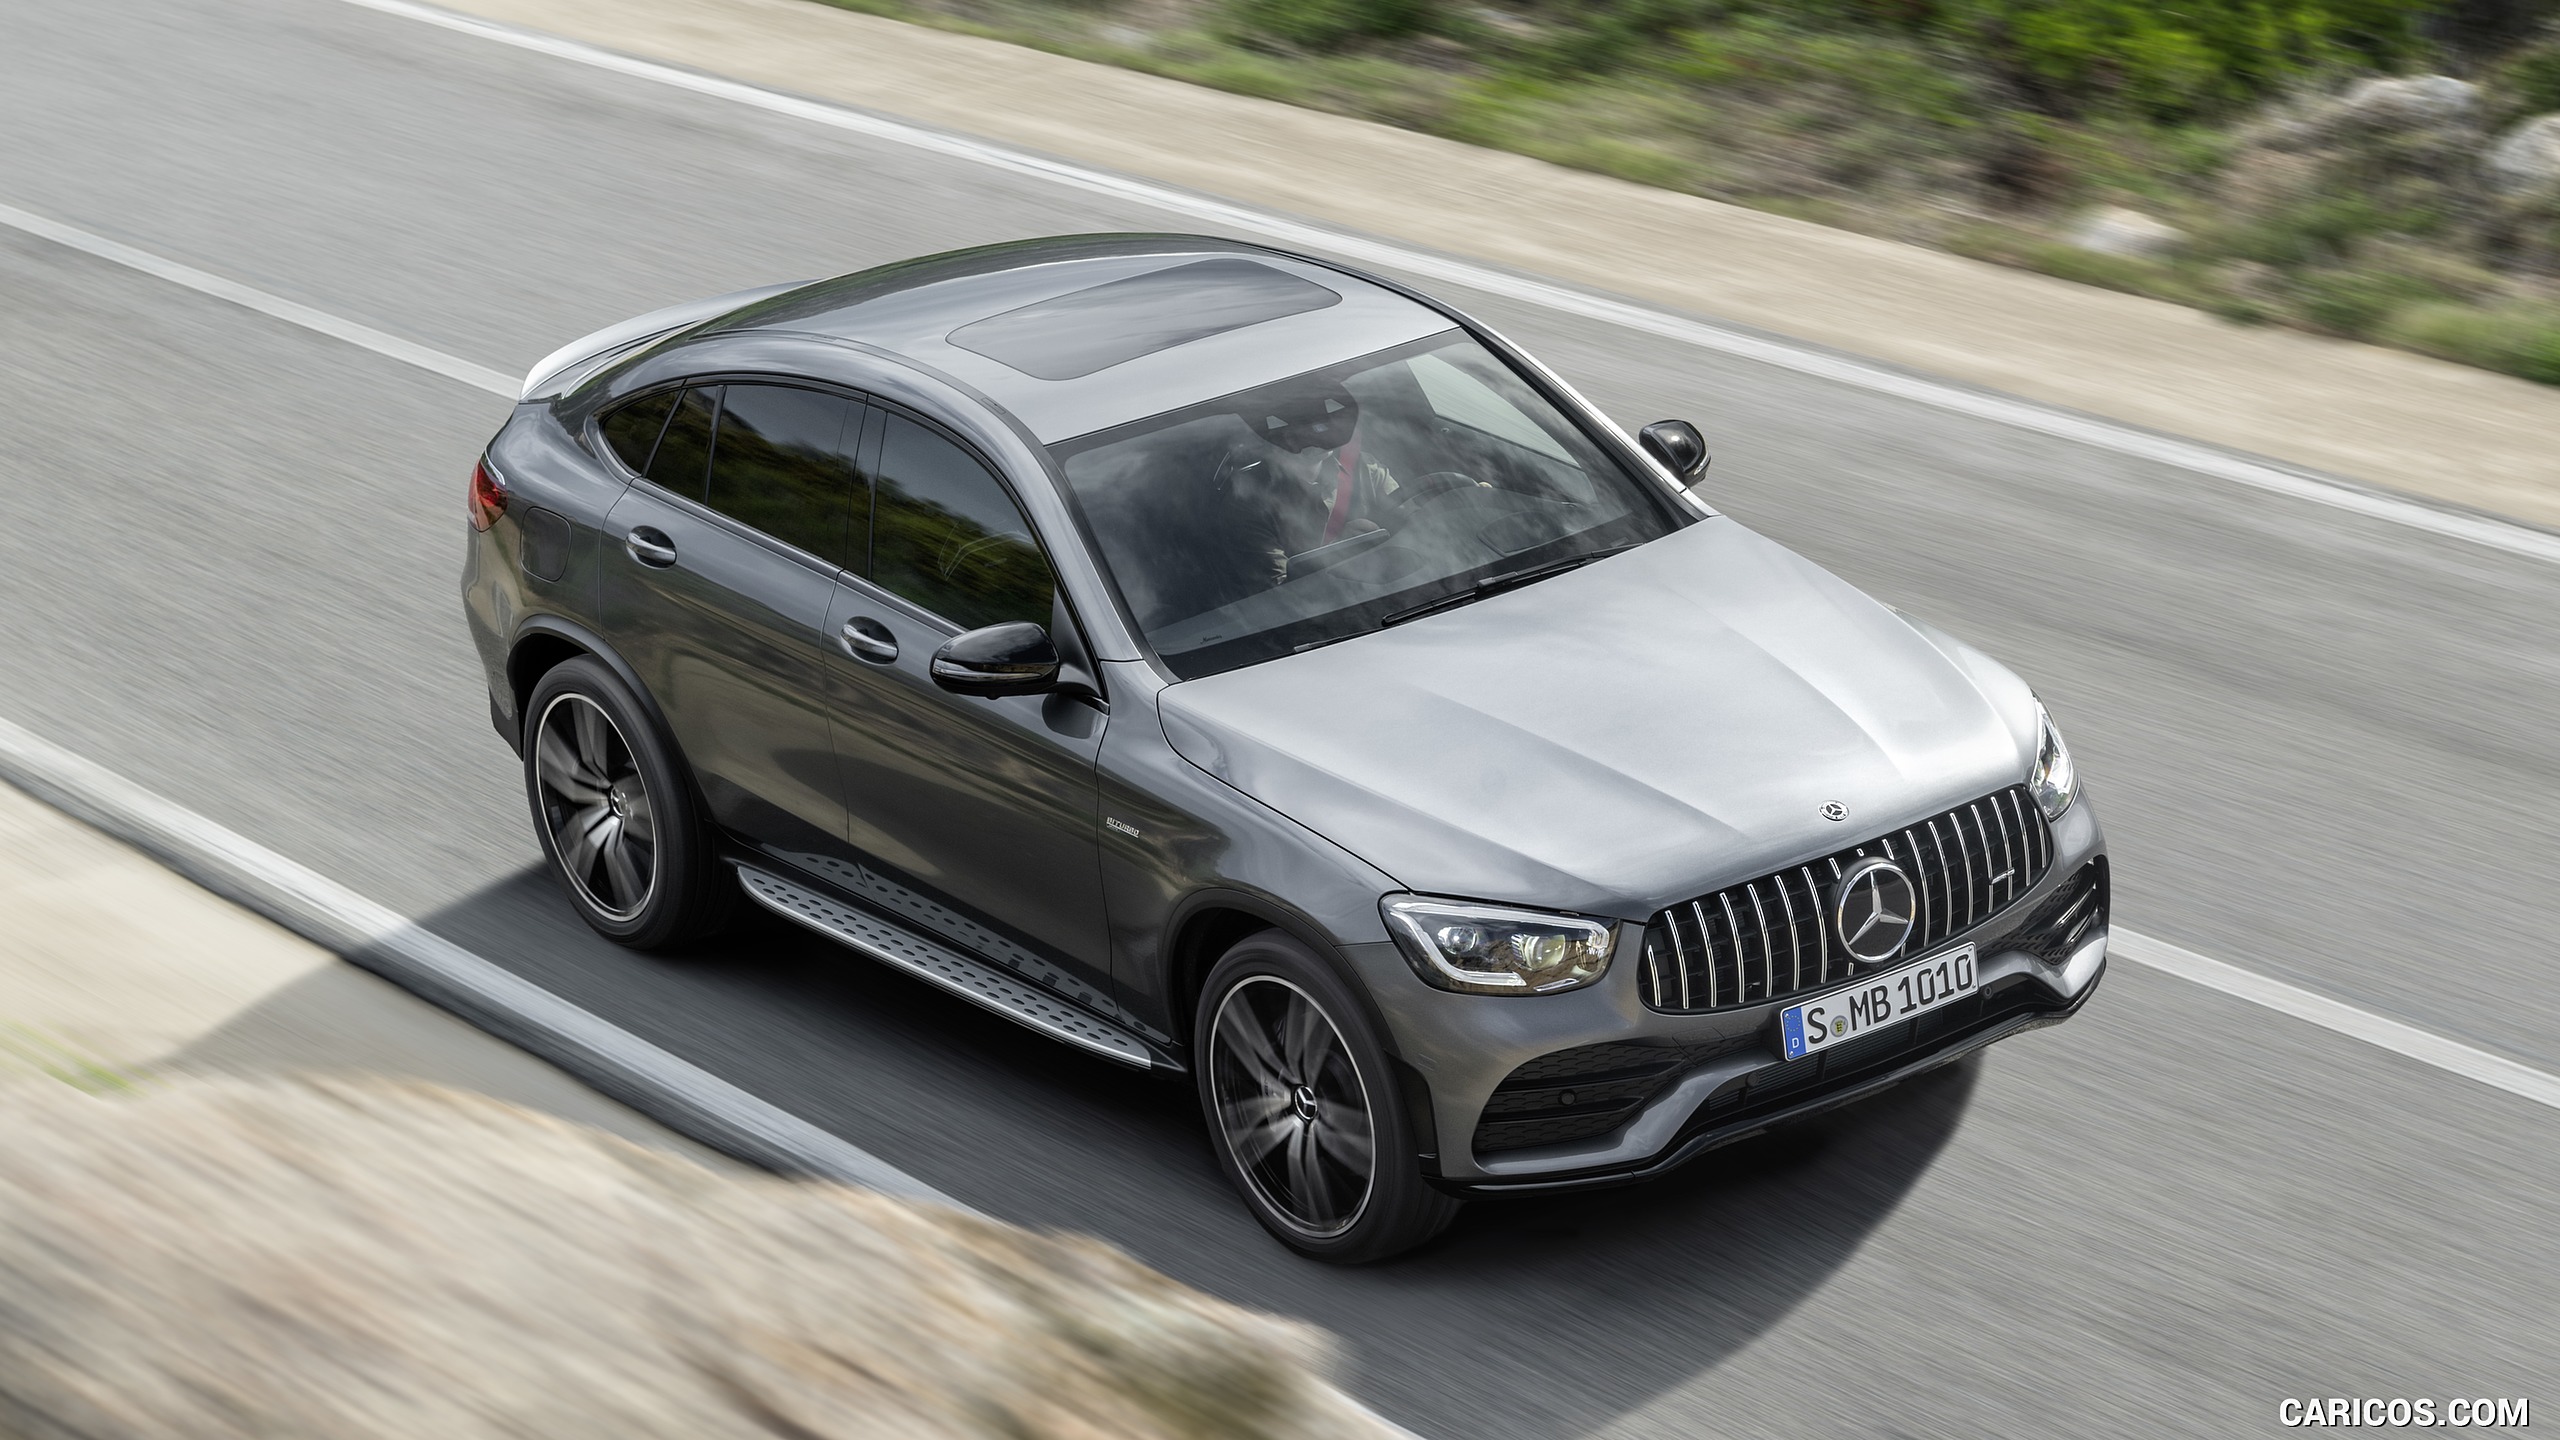 2020 Mercedes-AMG GLC 43 4MATIC Coupe - Top, #10 of 173